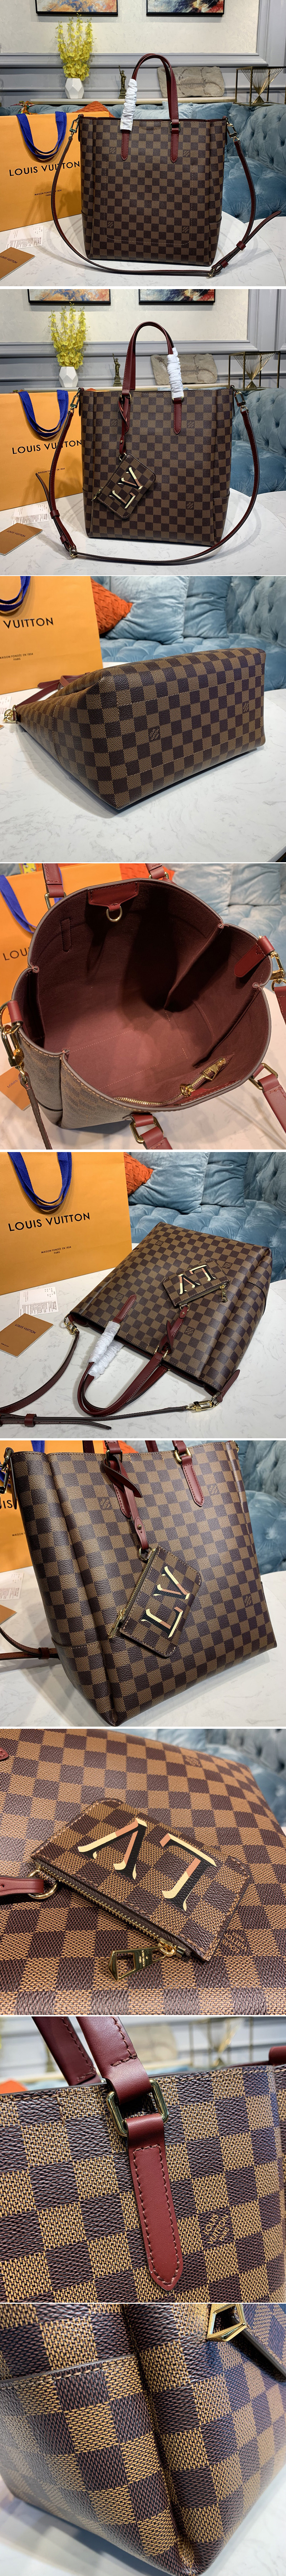 Replica Louis Vuitton N60293 LV Belmont MM Bag in Damier Ebene canvas With Cherry Berry Leather